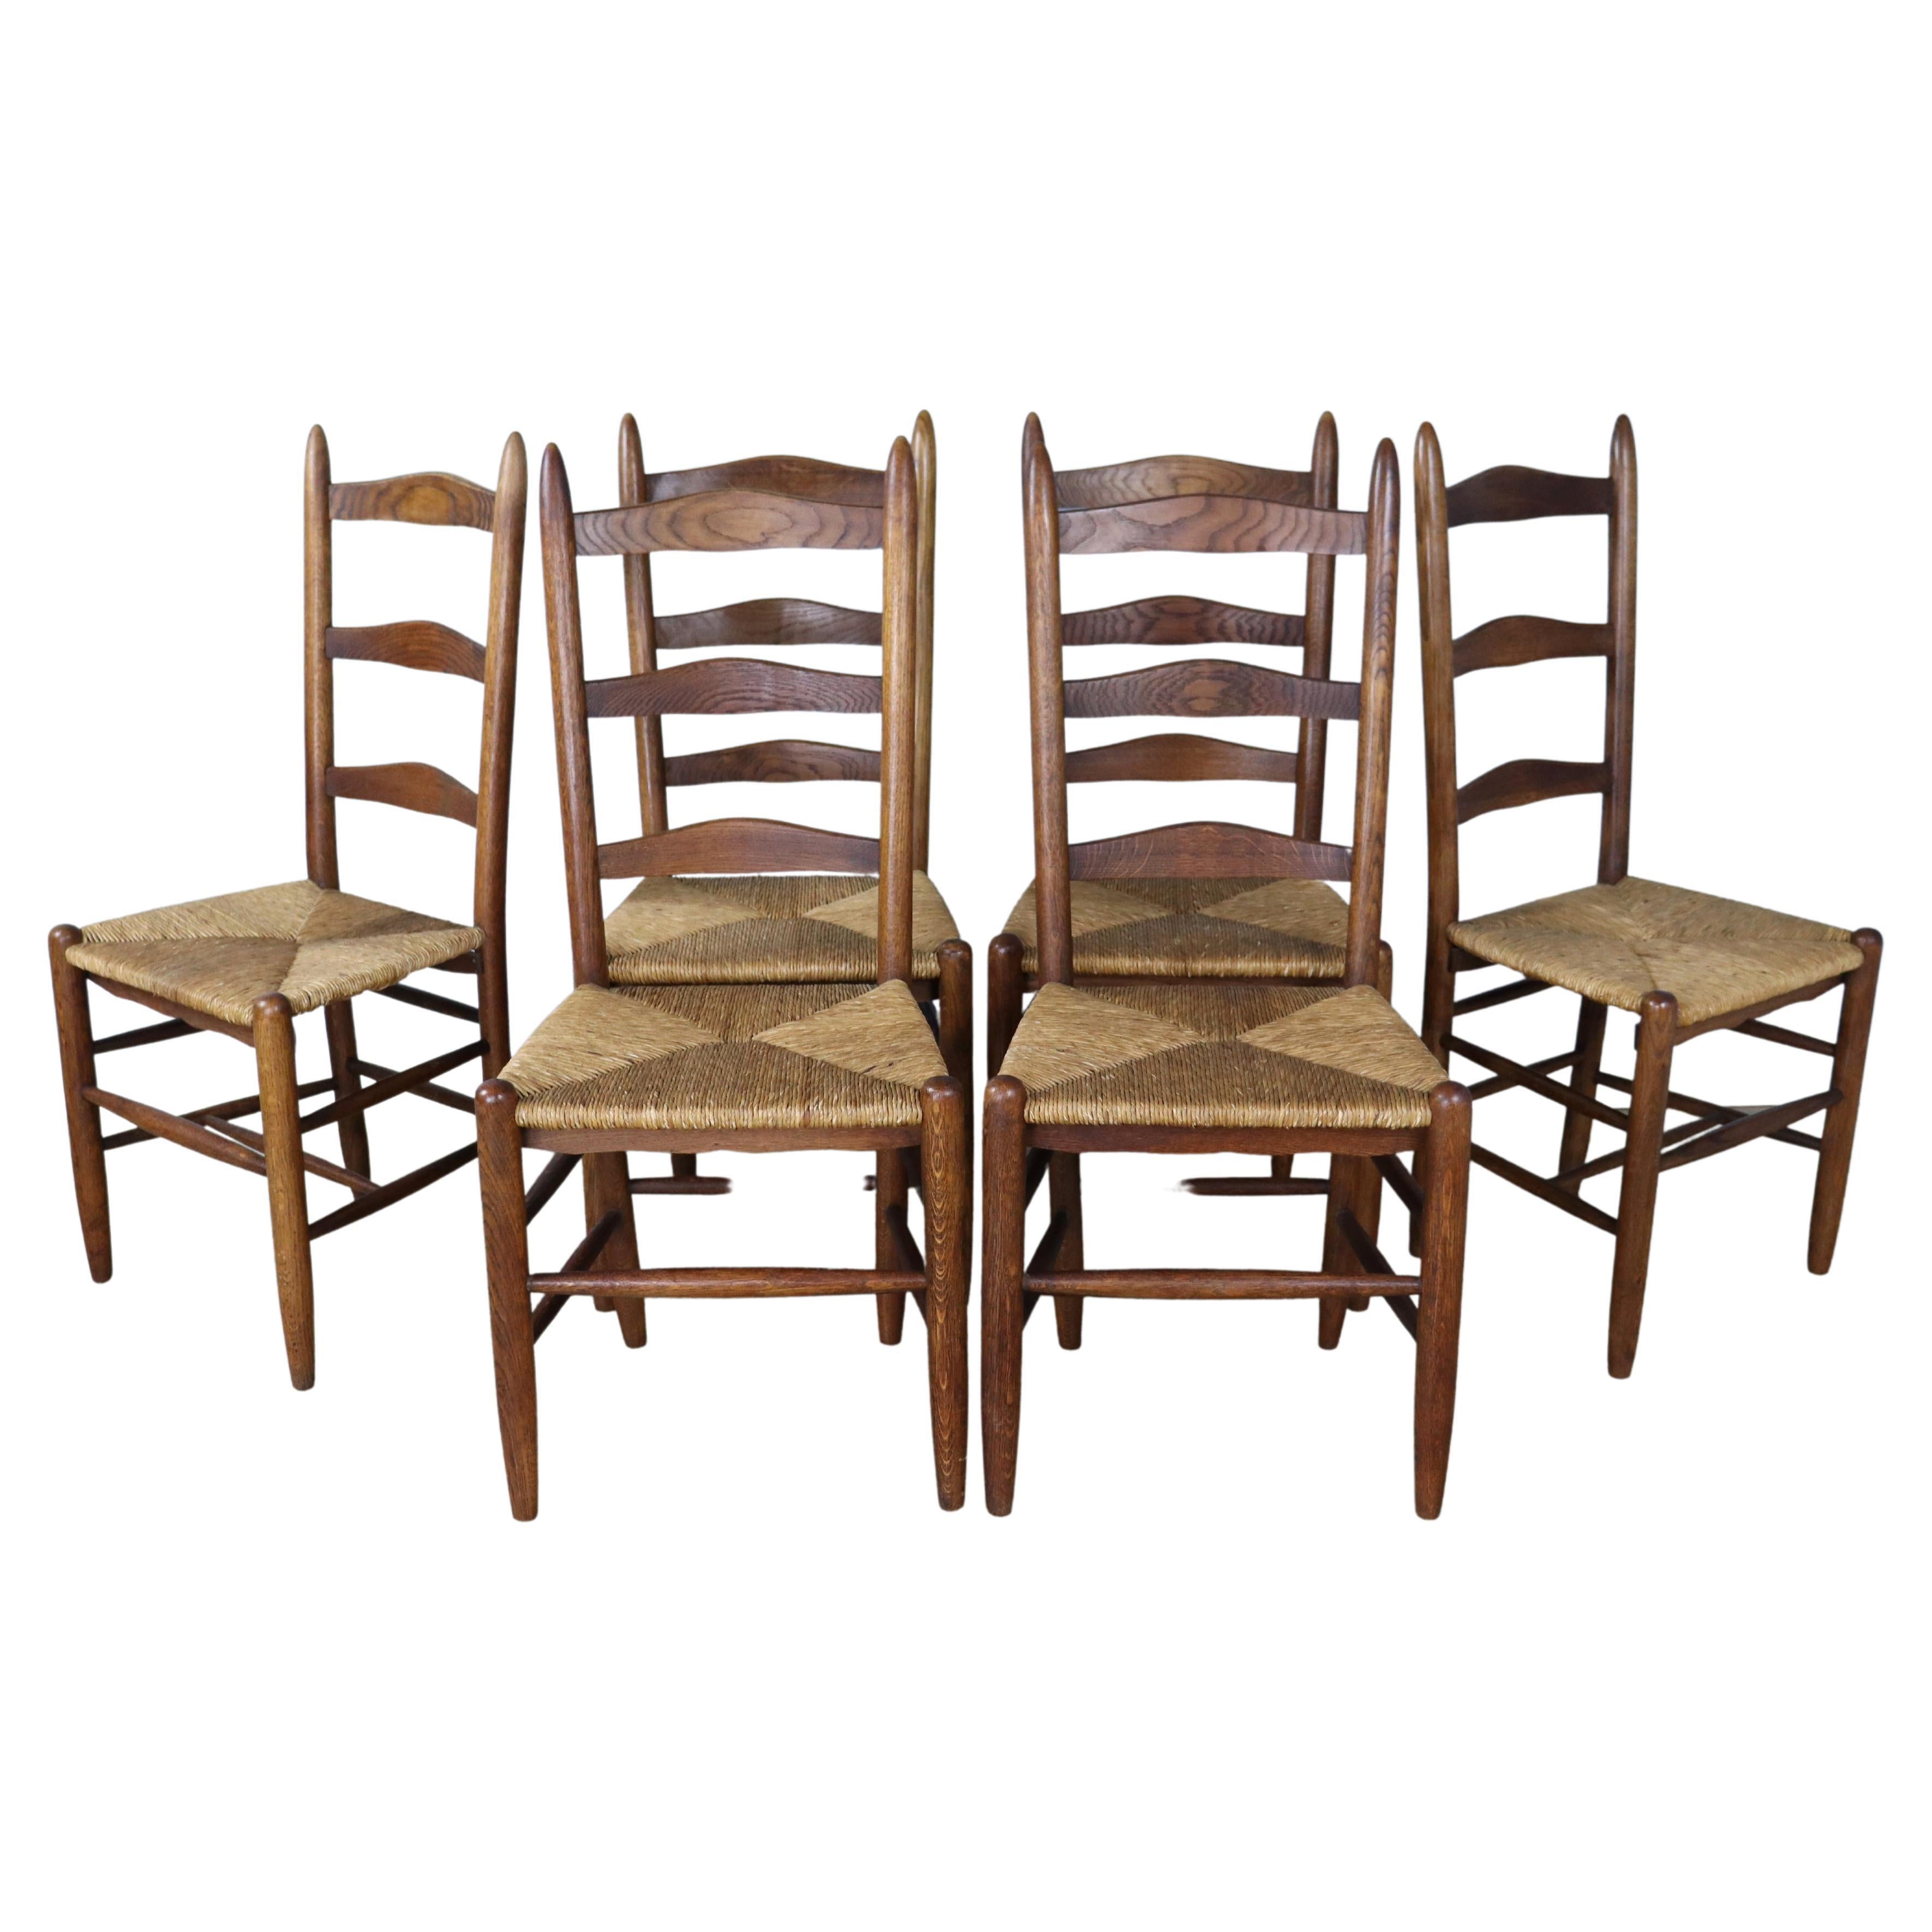 Set of 6 Country Oak Ladderback Chairs